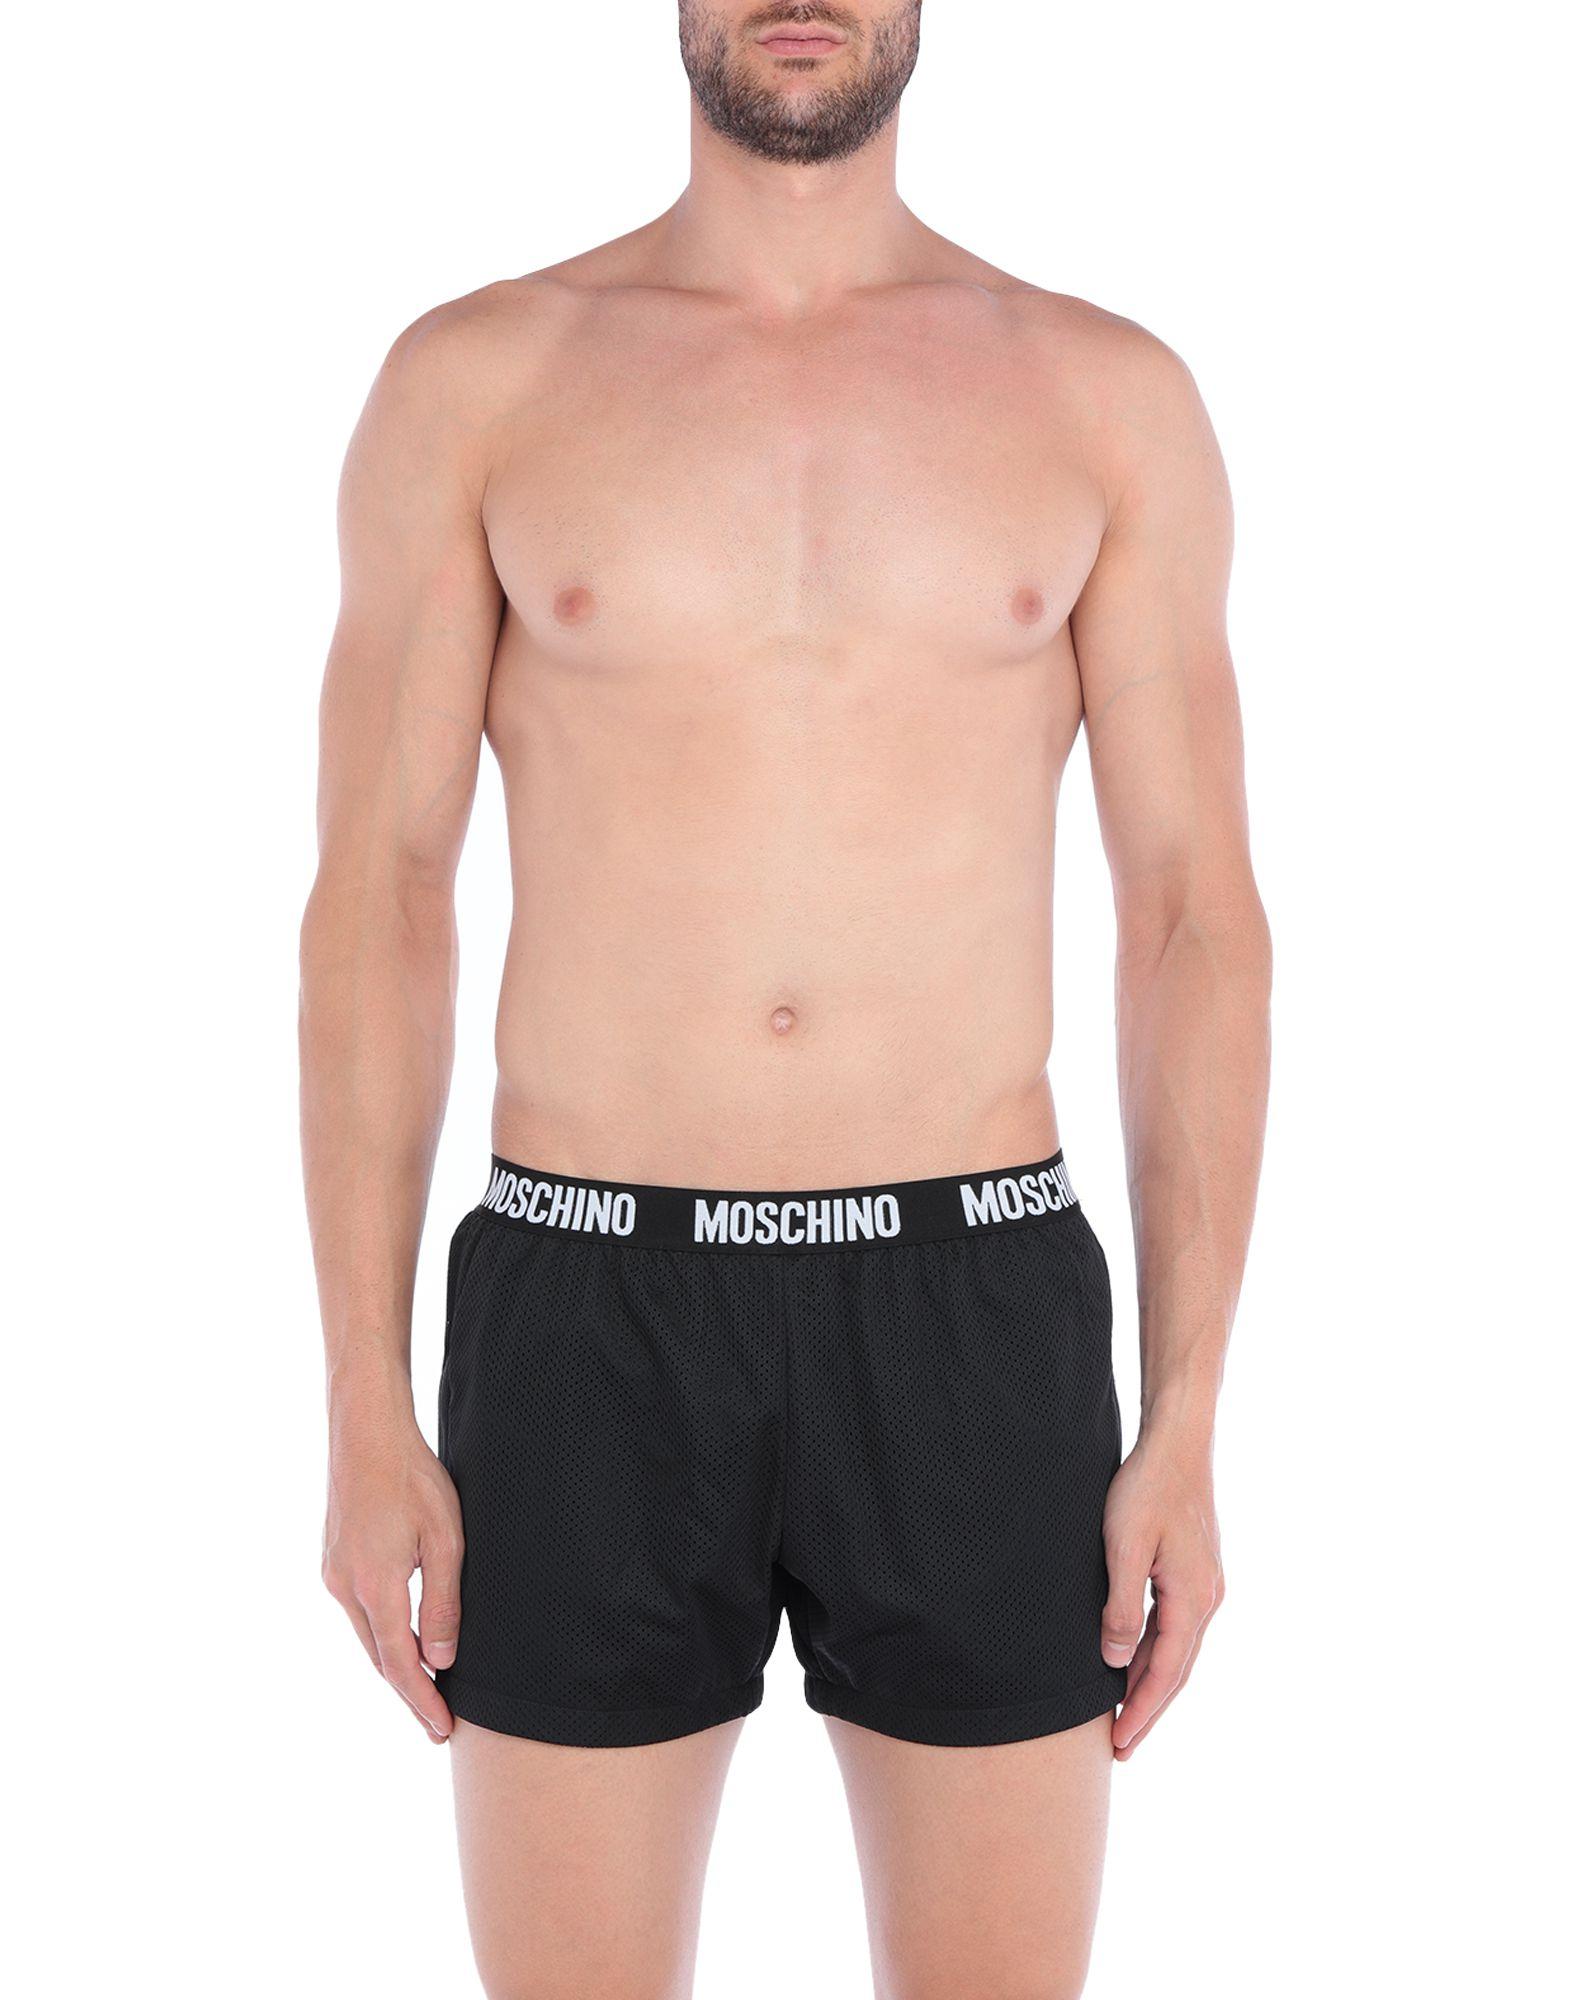 Moschino Swimming Trunks in Black for Men - Lyst